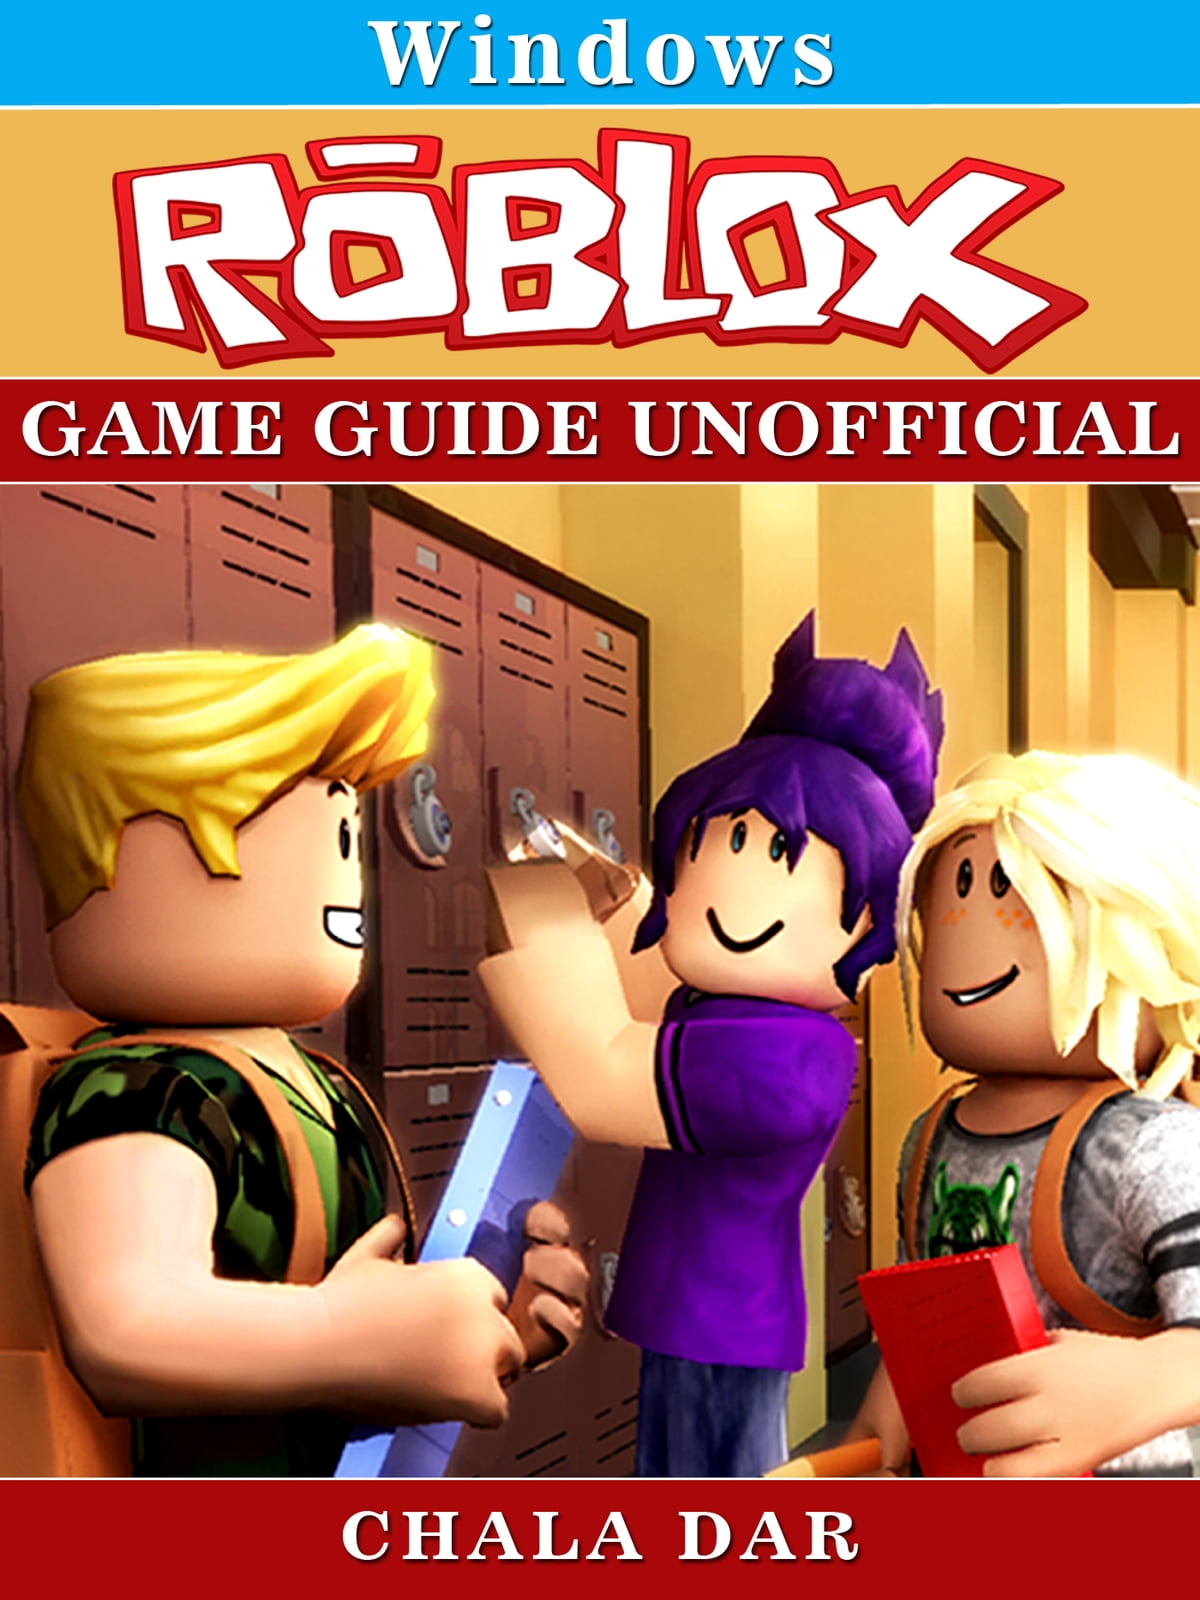 New Guide Roblox 2017 APK for Android Download